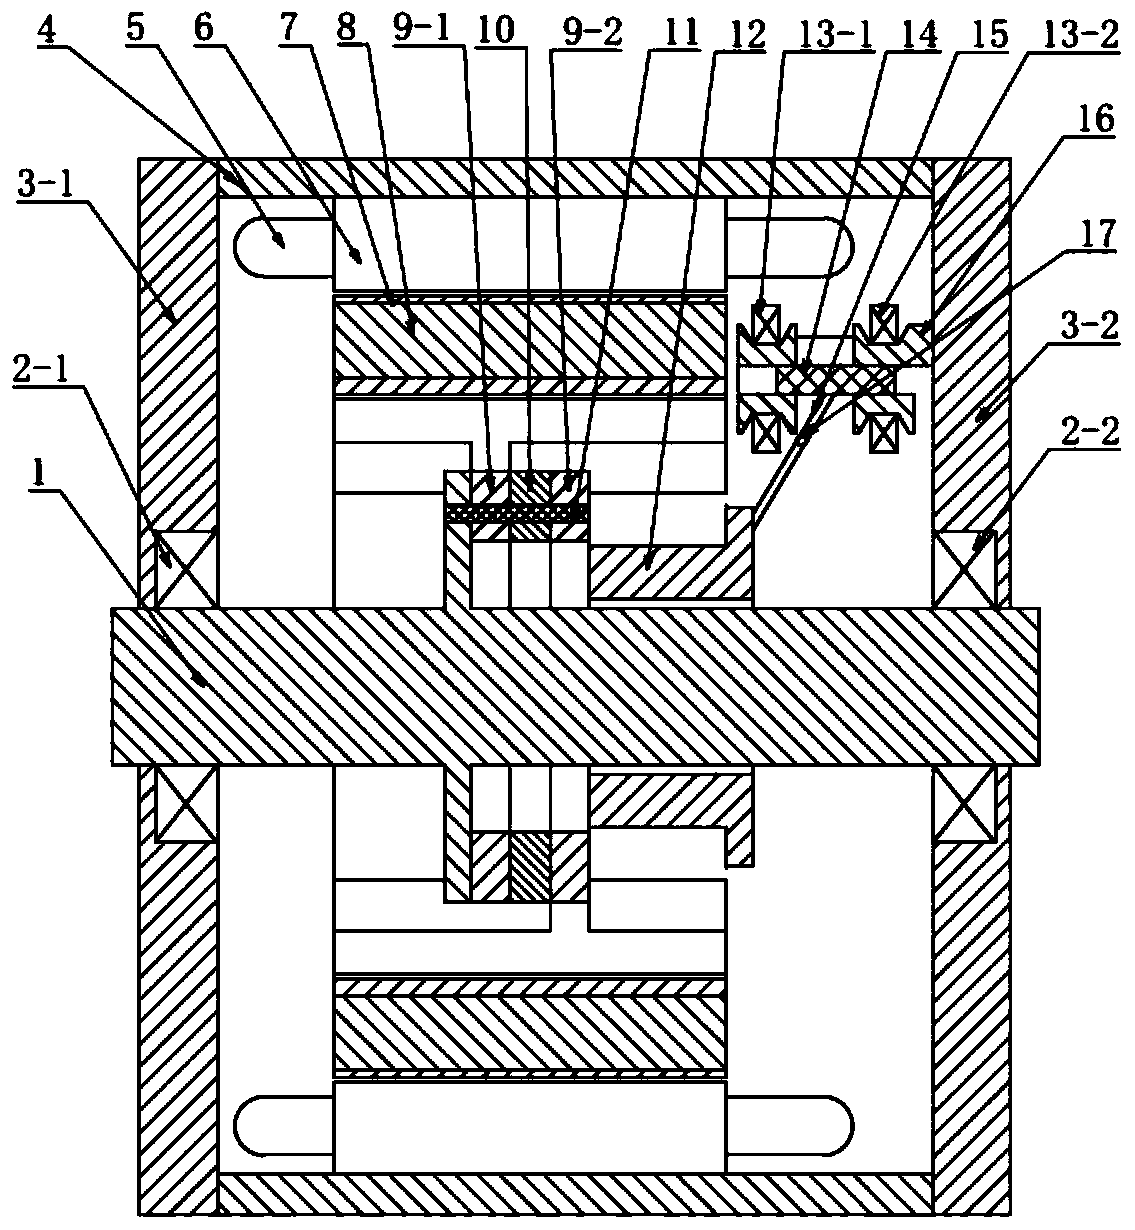 A mechanically adjustable magnetic rotating machine